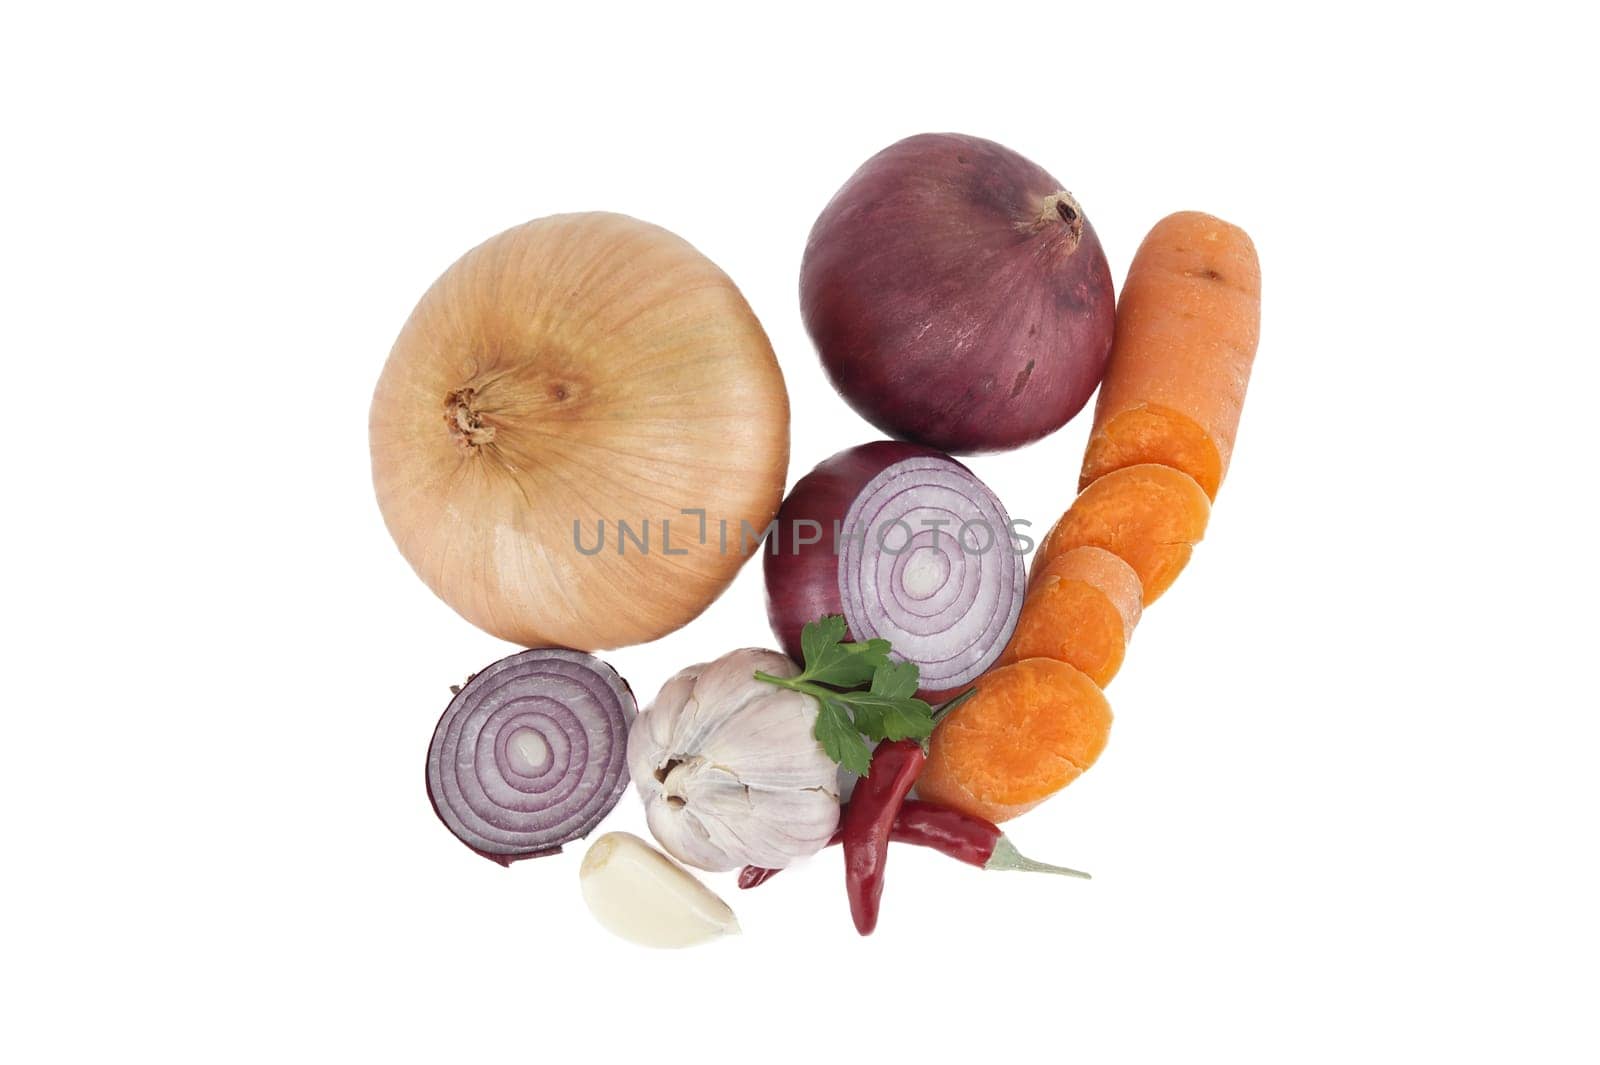 Top view of vegetables consisting red and yellow onions, red chili peppers, bulb of garlic and sliced carrots isolated on a white background